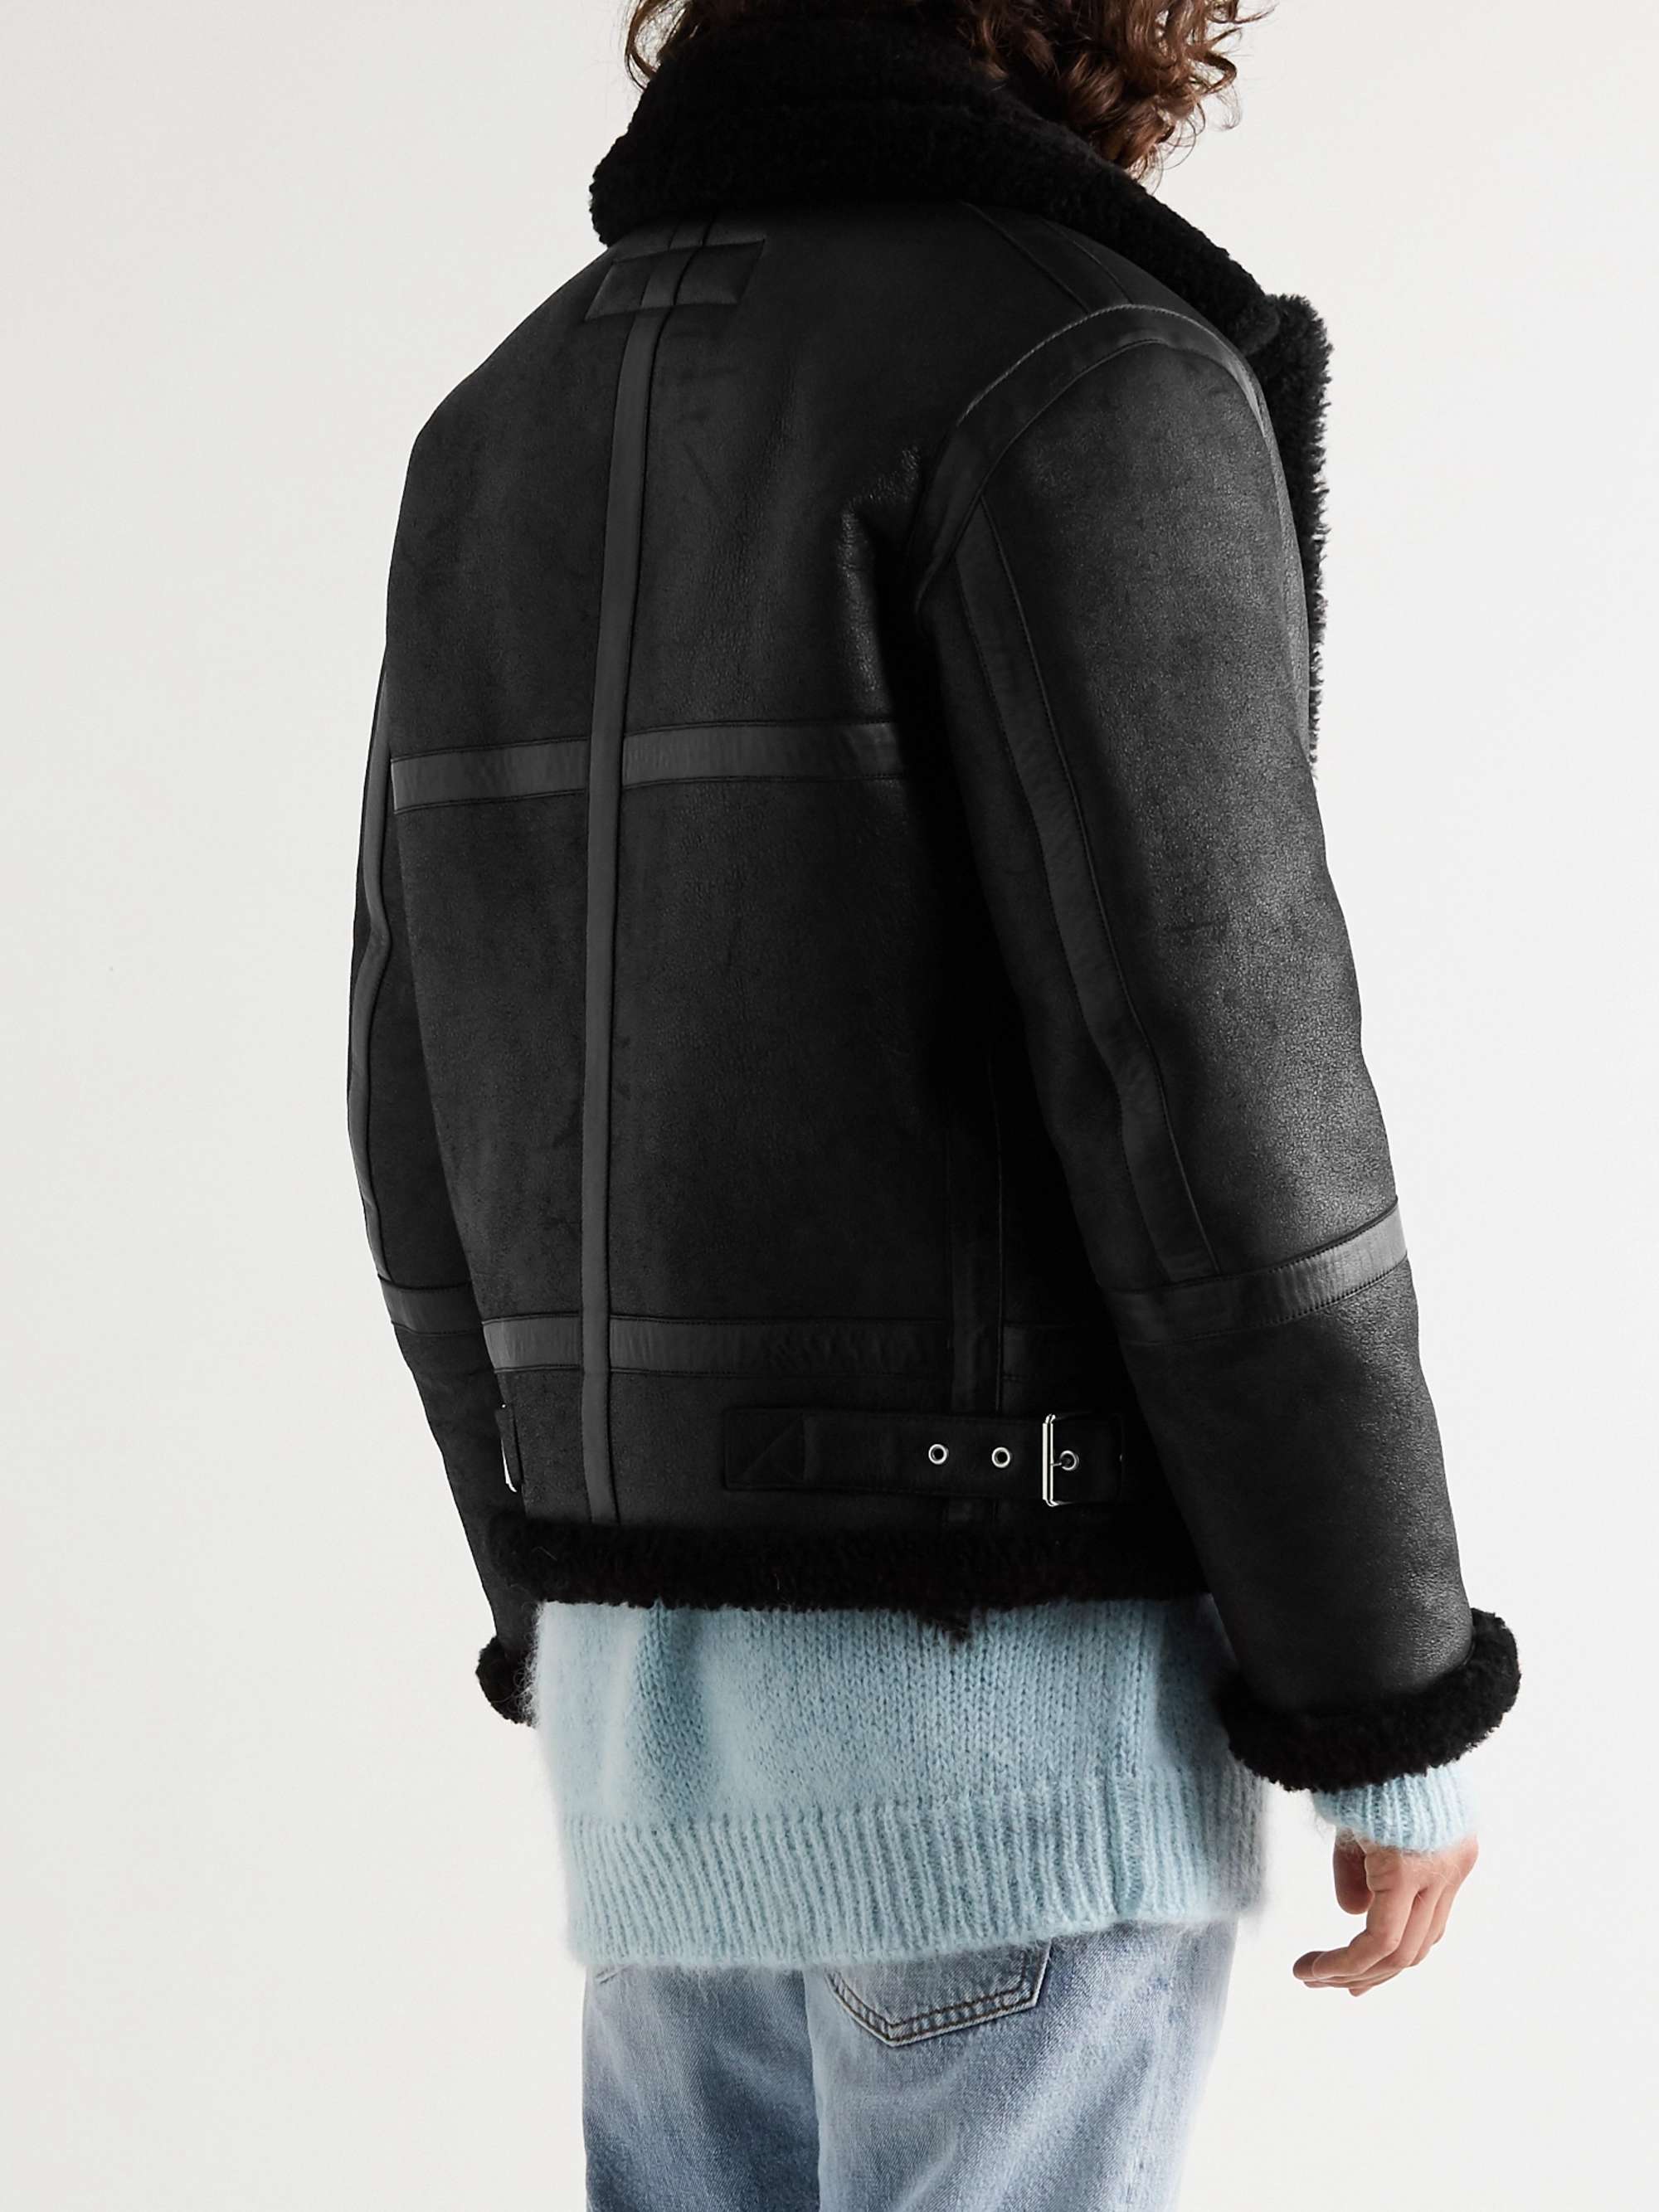 ACNE STUDIOS Shearling-Lined Full-Grain Leather Jacket